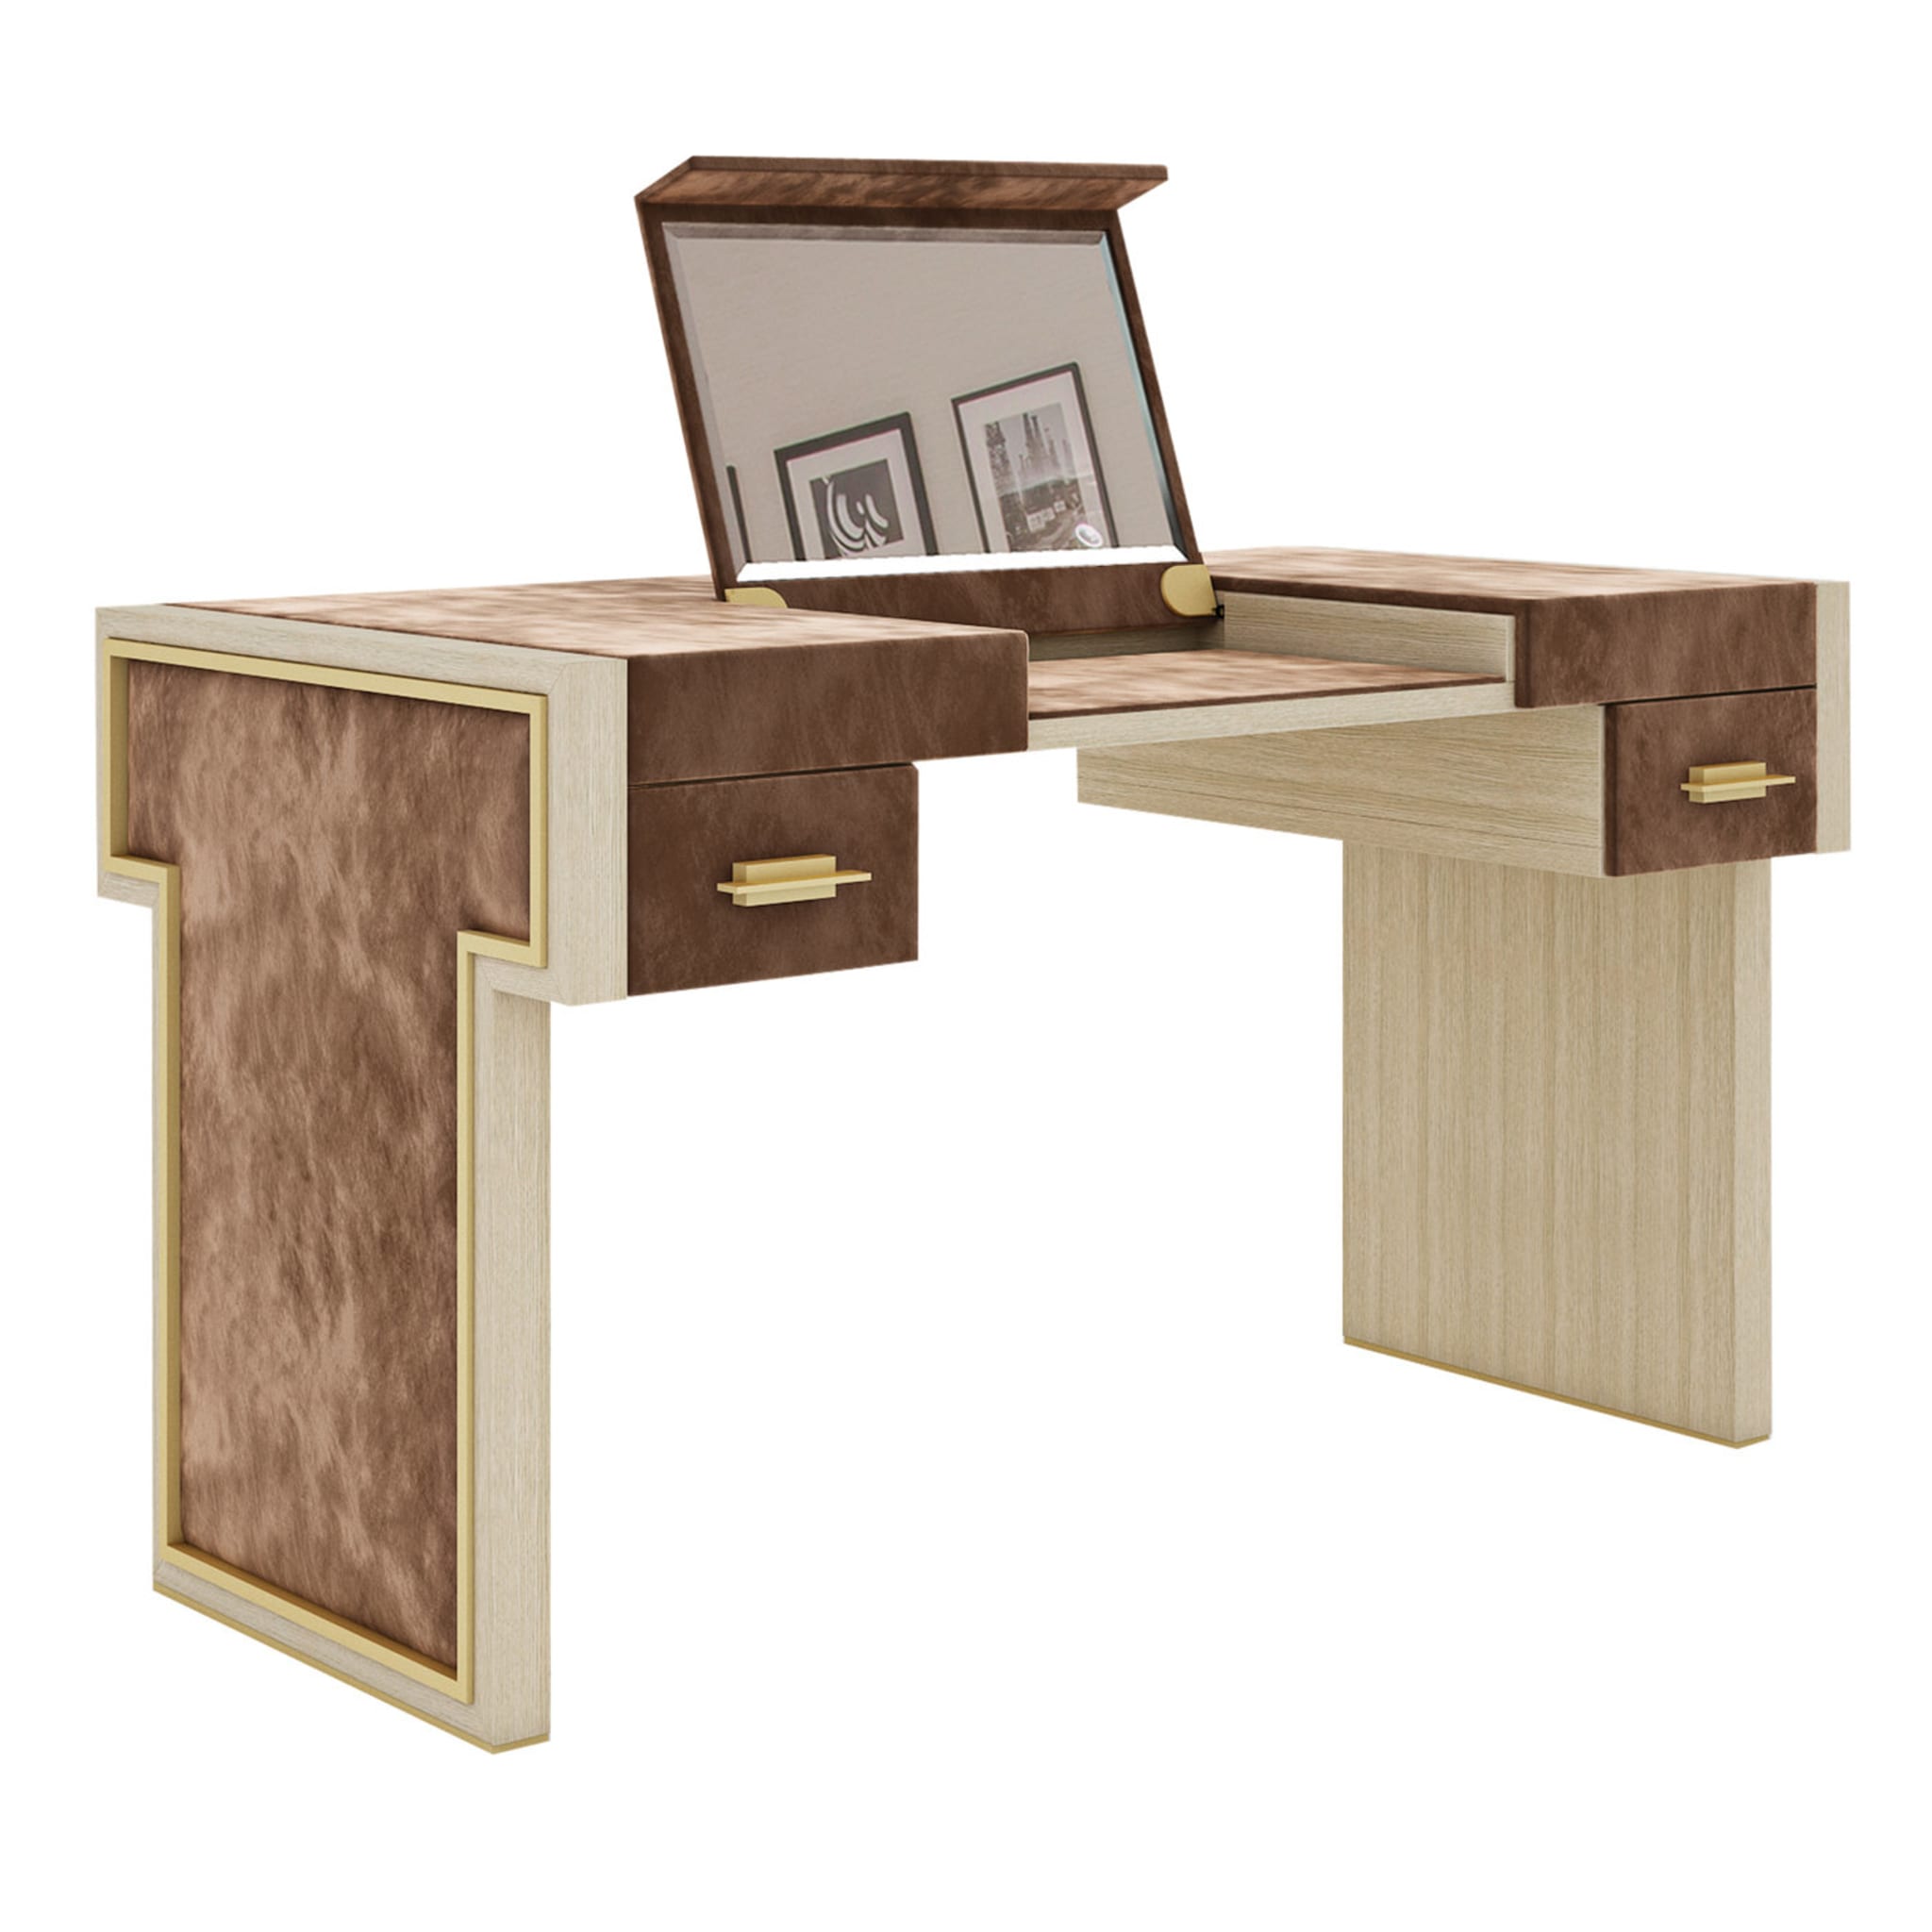 Tribeca Vanity Table by Giannella Ventura - Main view